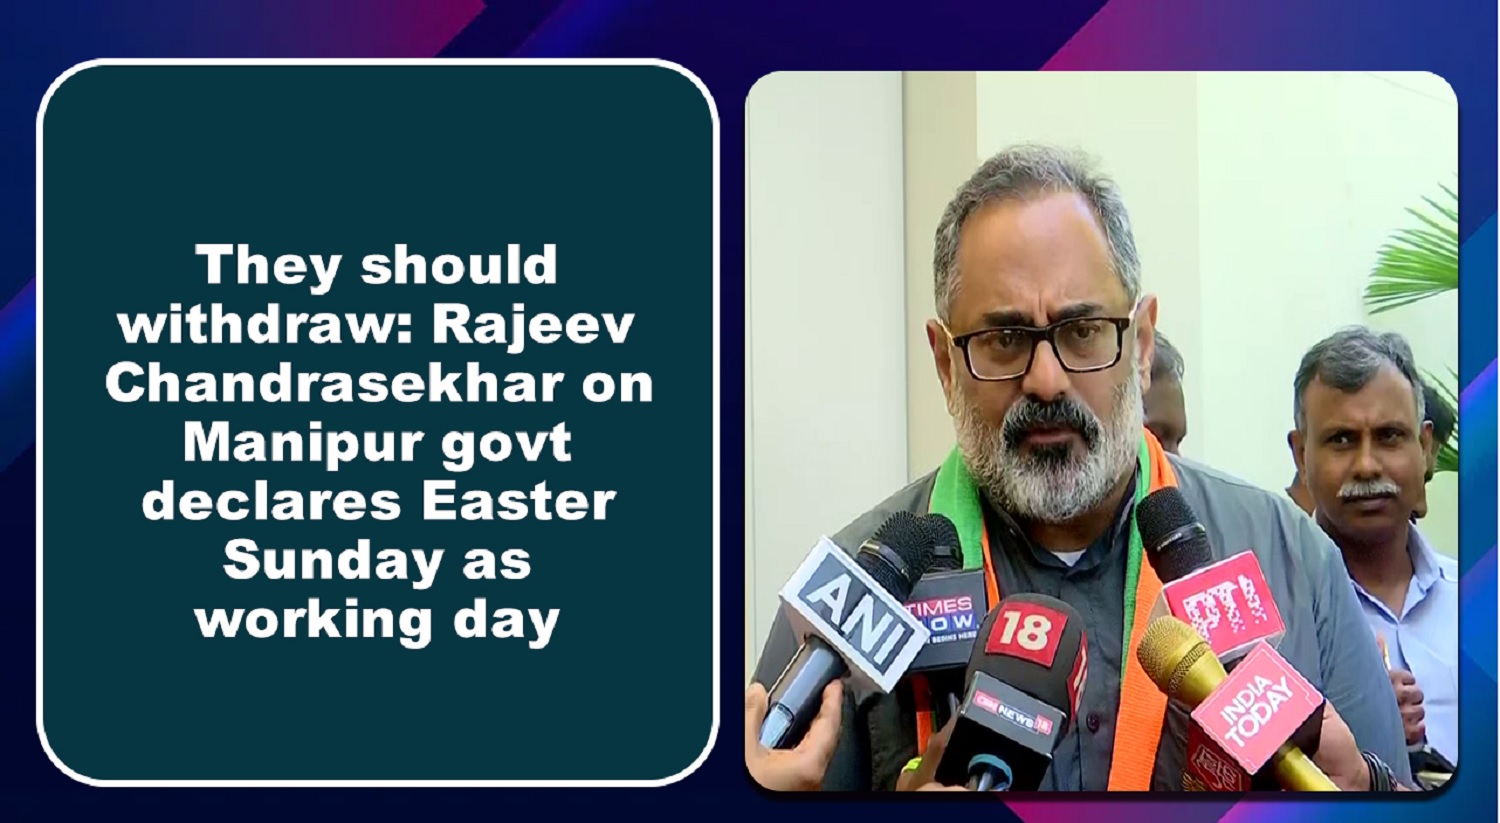 They should withdraw: Rajeev Chandrasekhar on Manipur government declares Easter Sunday as working day